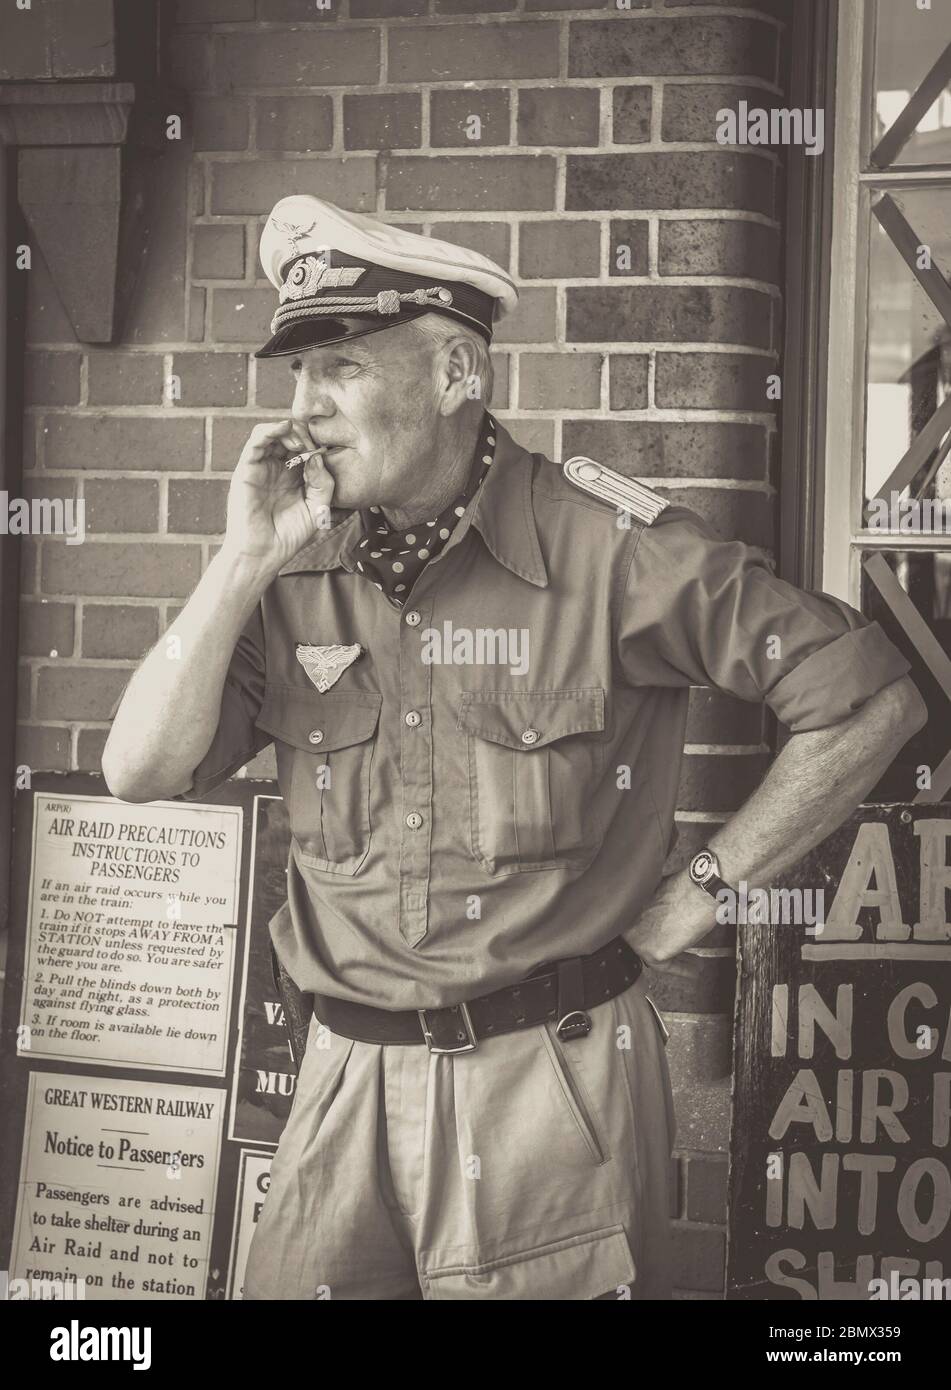 Monochrome, B & W, front close up of German Luftwaffe officer at vintage station, Severn Valley Railway 1940s summer event, UK. Stock Photo